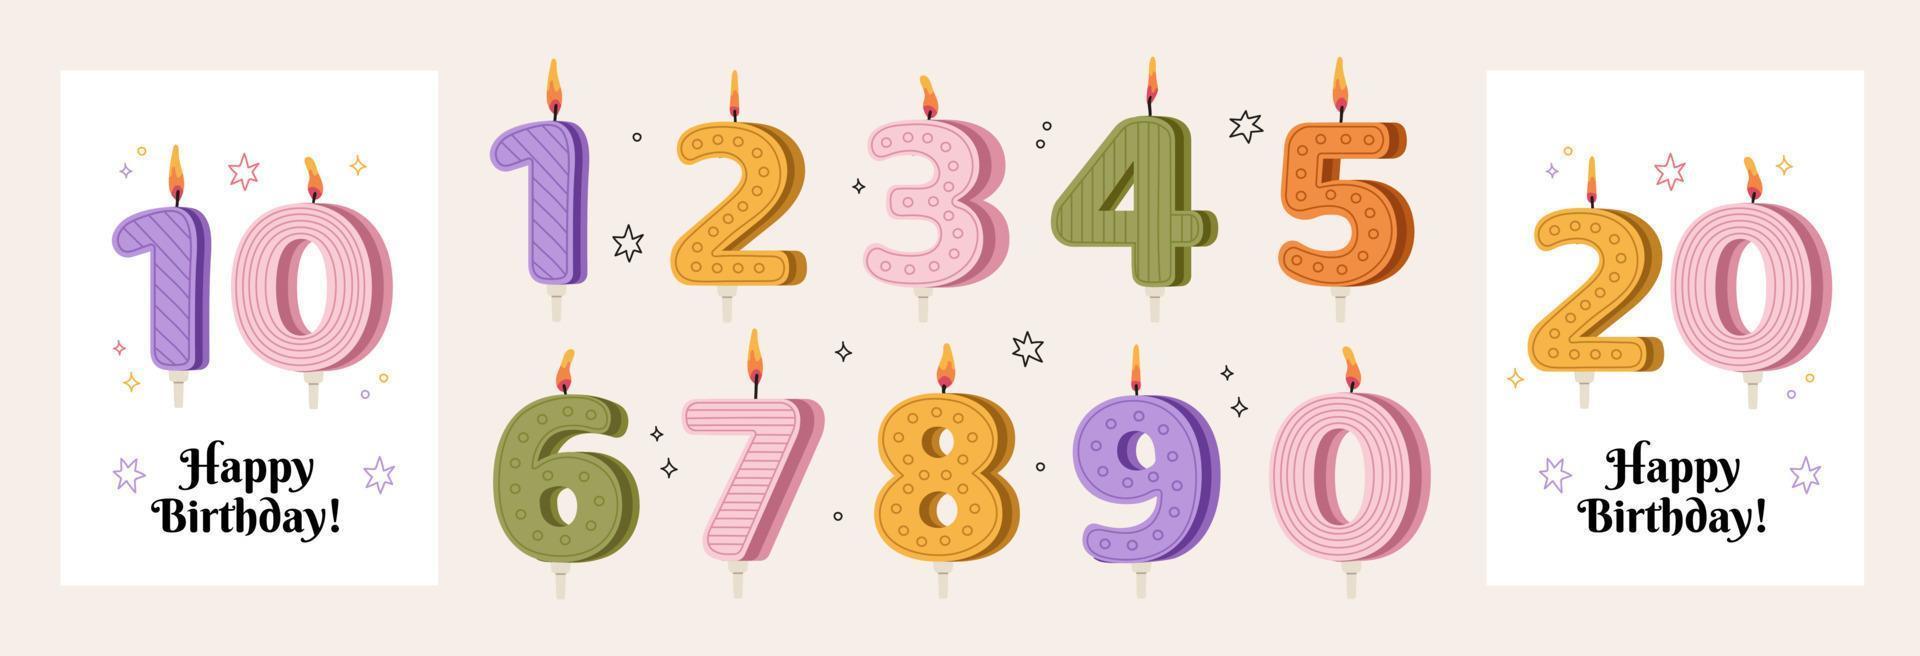 Festive illustration collection of bright Birthday Cake Candle Numbers 0, 1, 2, 3, 4, 5, 6, 7, 8, 9, anniversary holiday candles vector illustration set. Decoration for holiday celebration, surprise